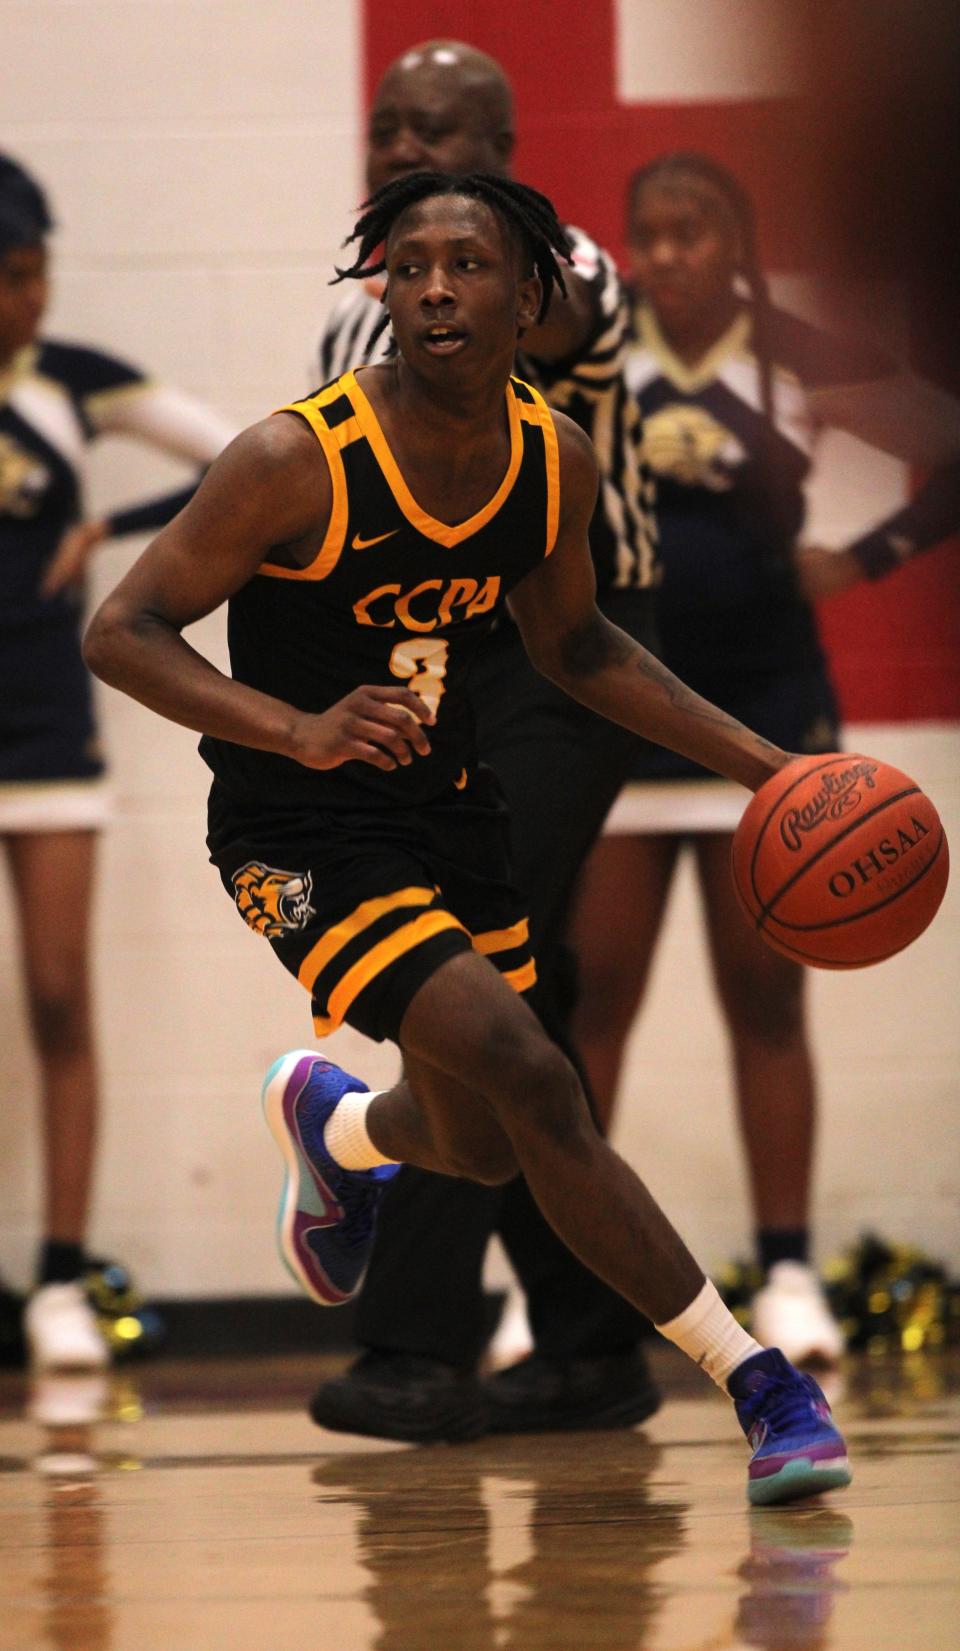 CCPA senior Deonta Booker is second-team all-state in Division IV.